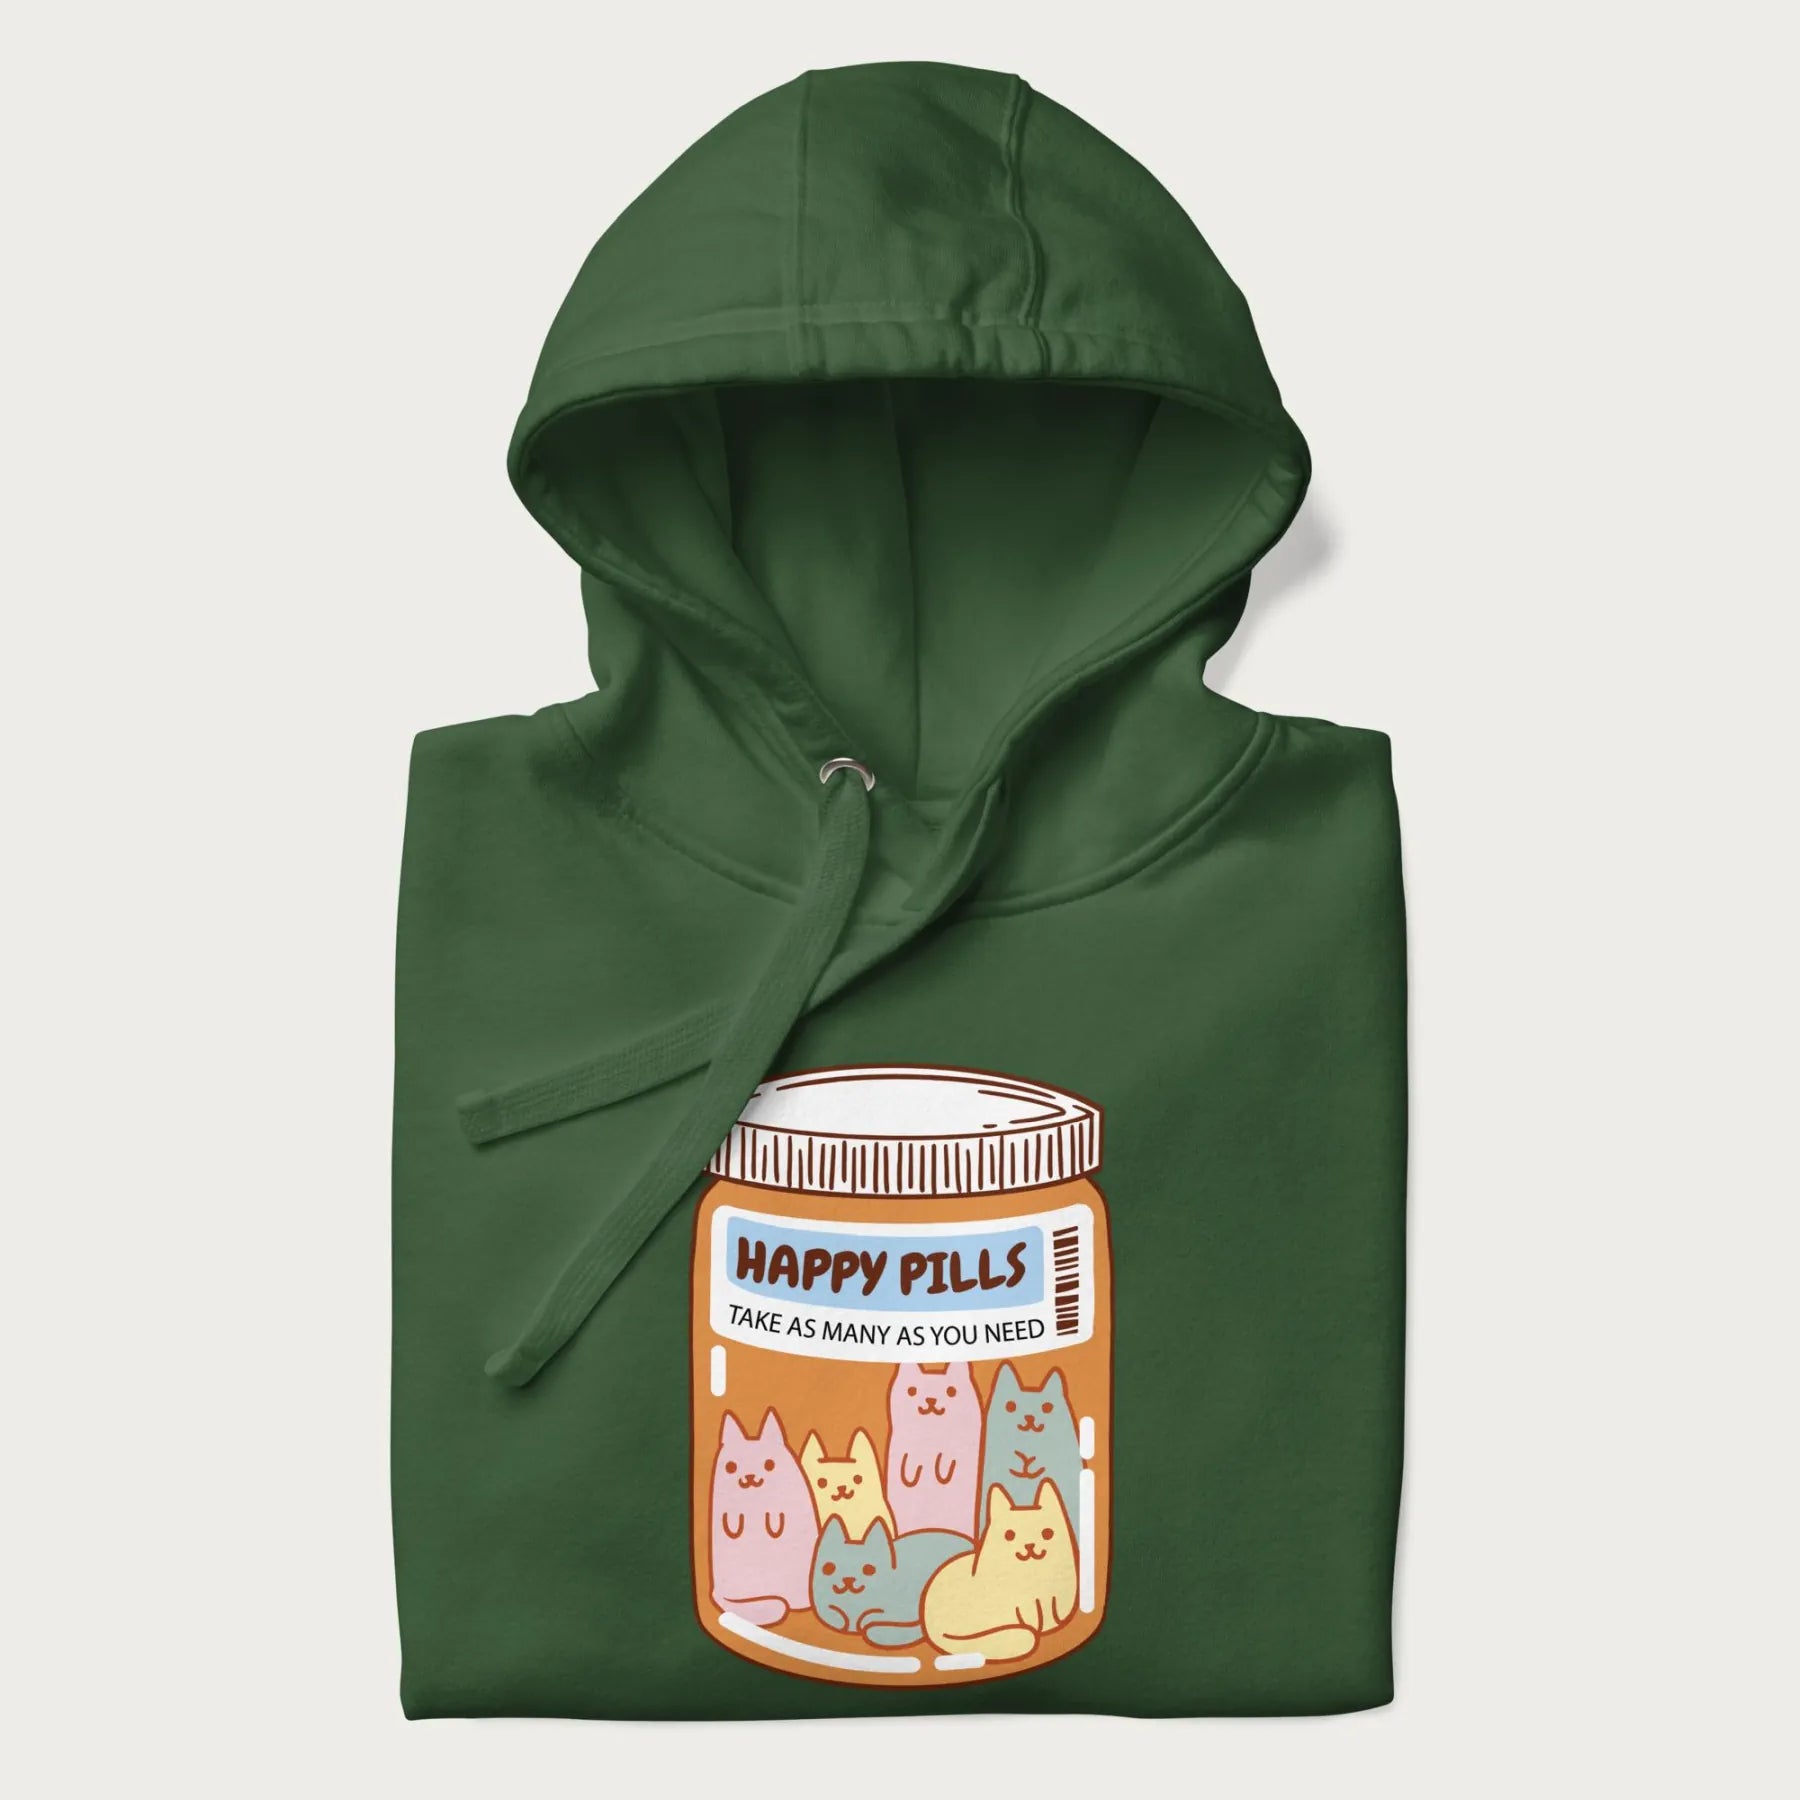 Cartoon cats in a pill bottle labeled 'Happy Pills' on a folded dark green hoodie.